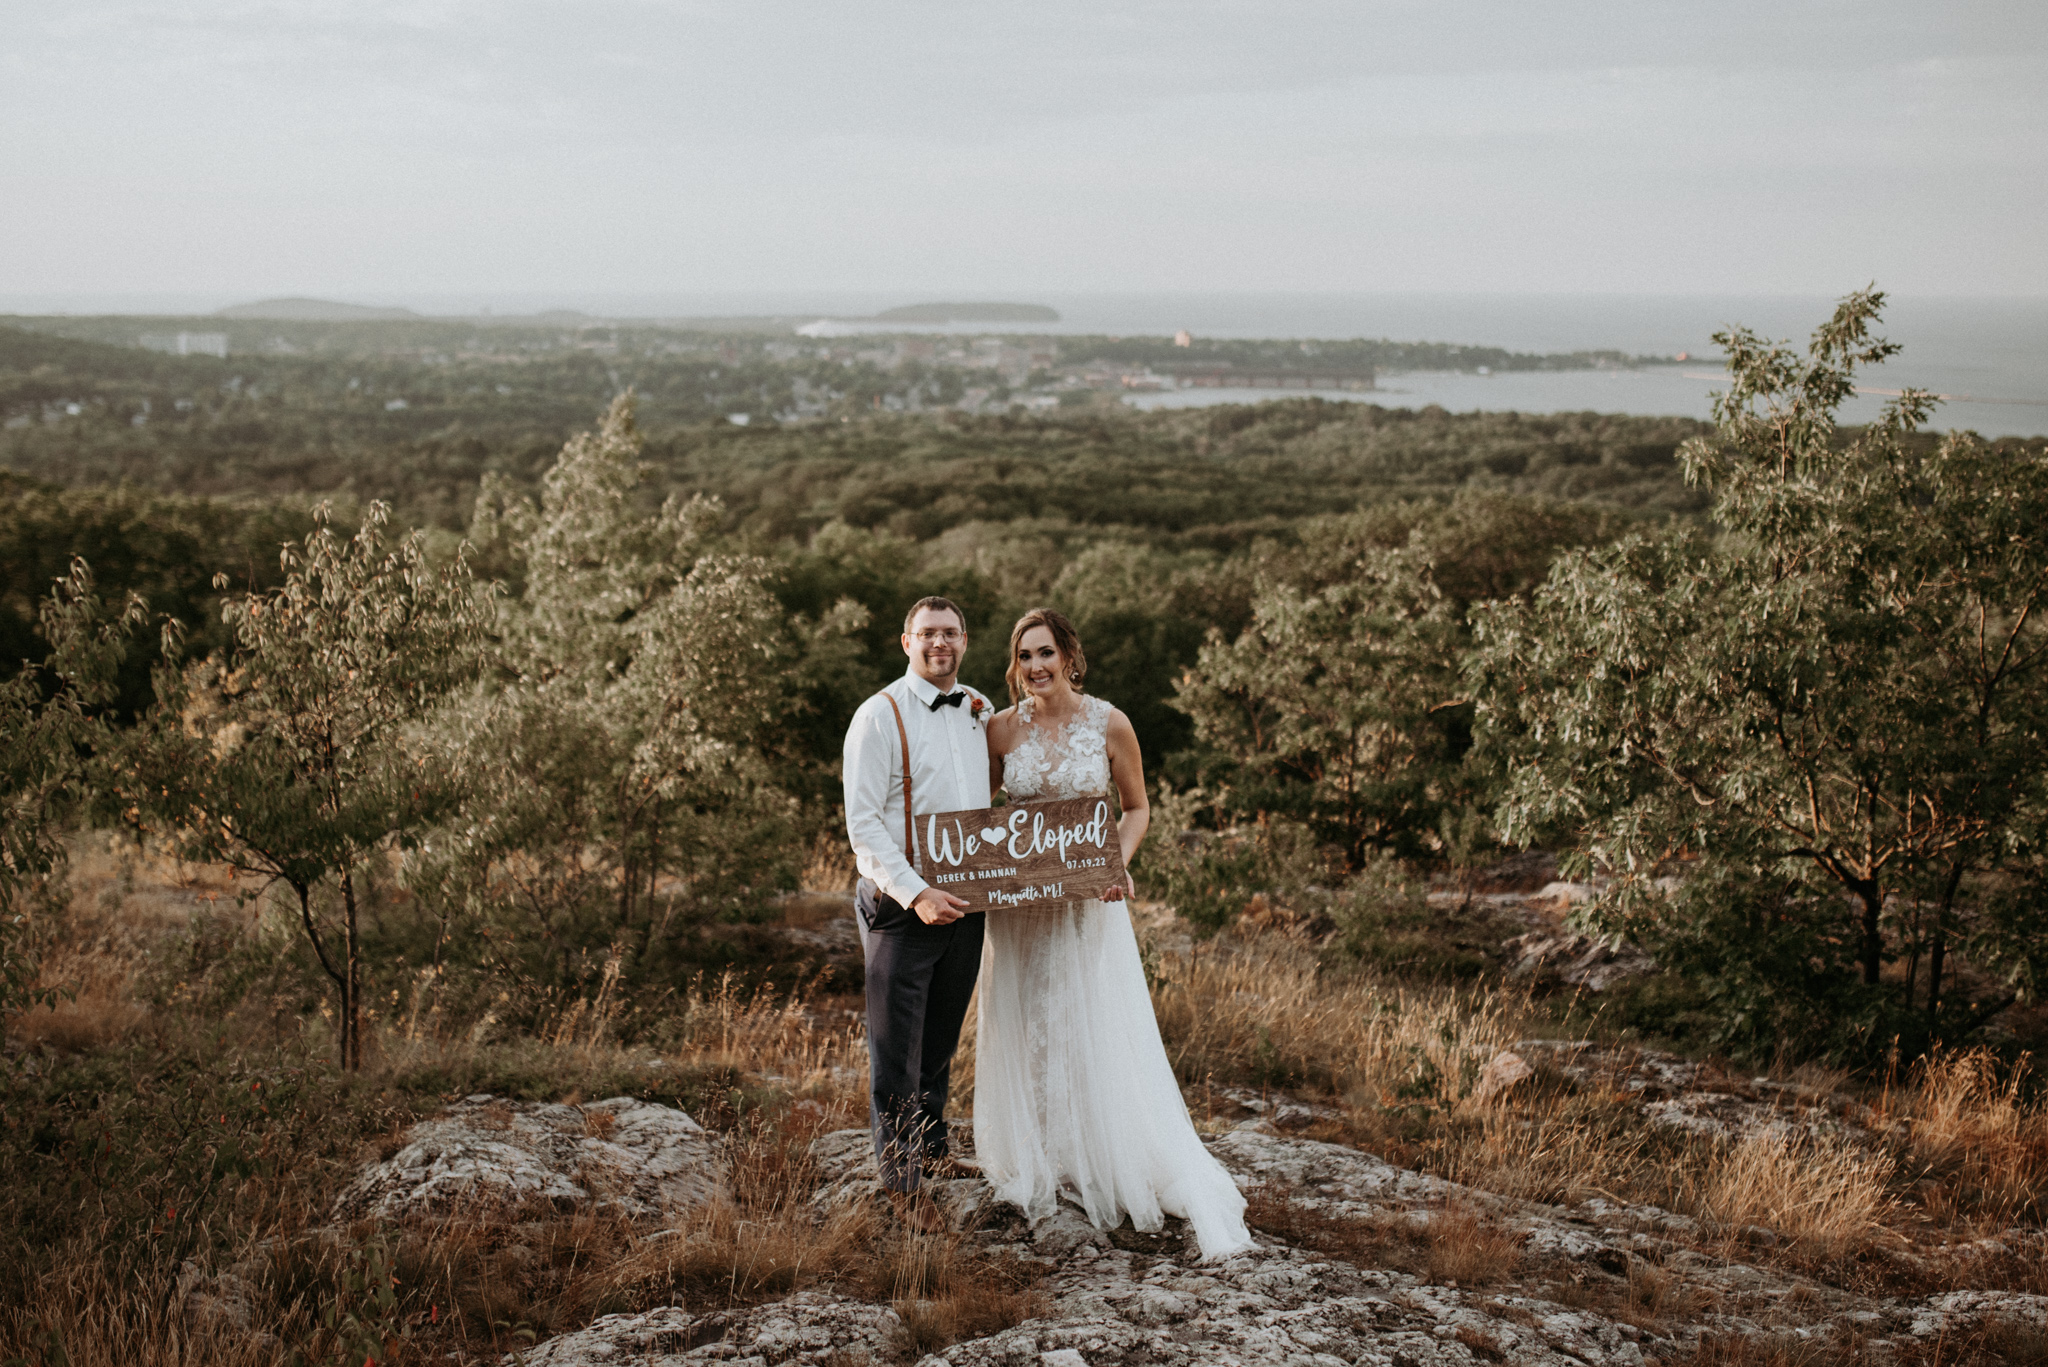 Bride and groom holding "We Eloped" sign on Marquette Mountain.